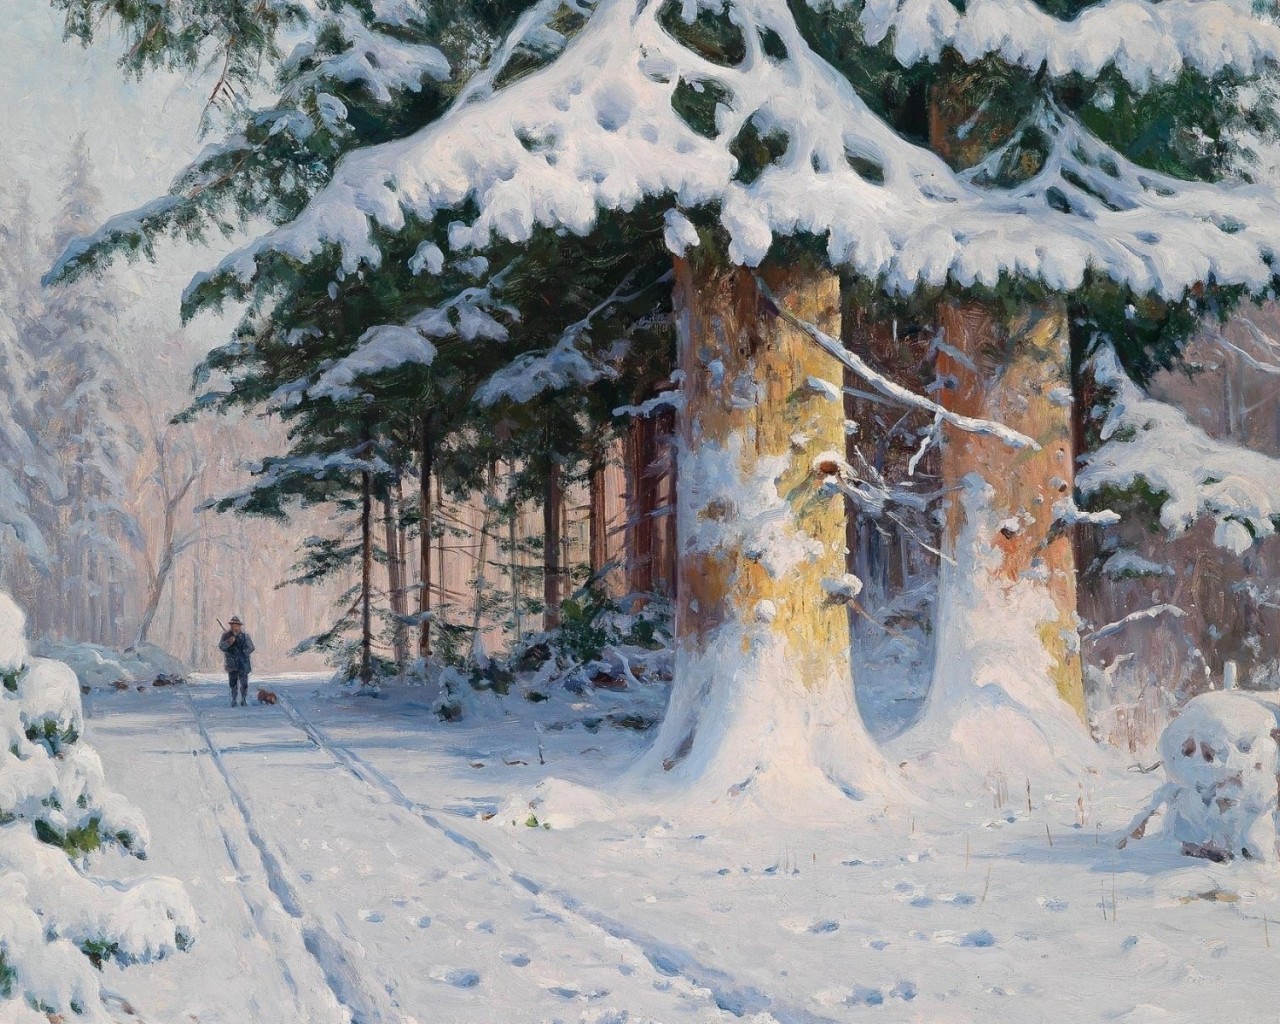 paintings_landscapes_winter_trees_drawings_1280x1024_26877